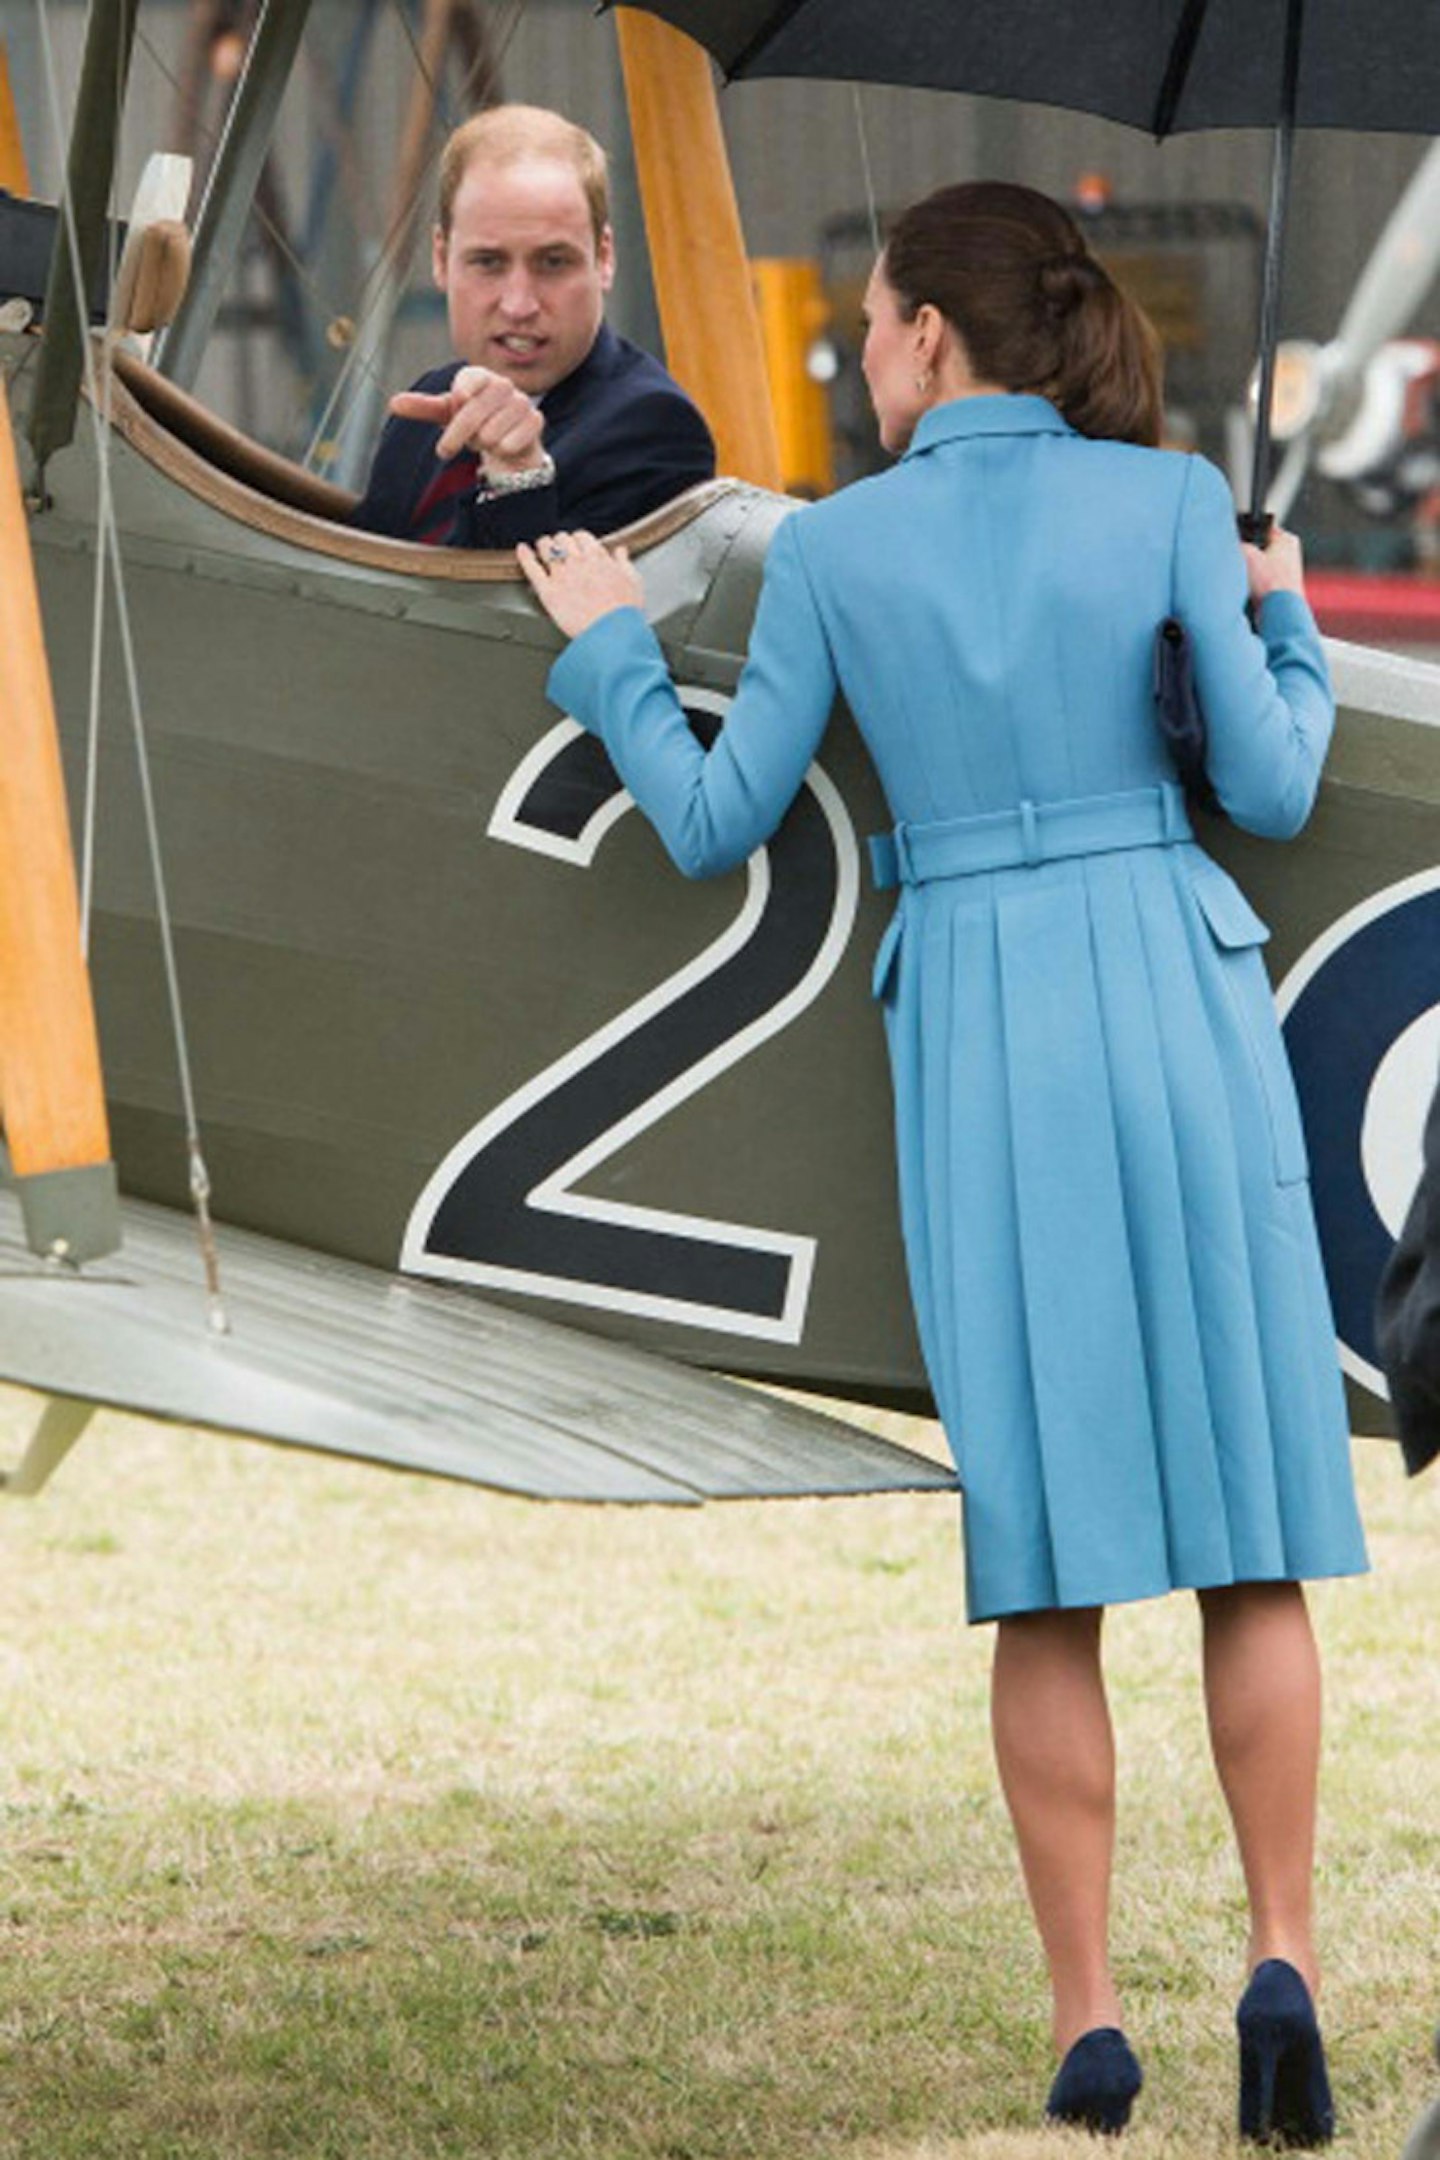 52-51. The royal couple at a War Memorial in Seymour Square in Blenheim, New Zealand in April 2014